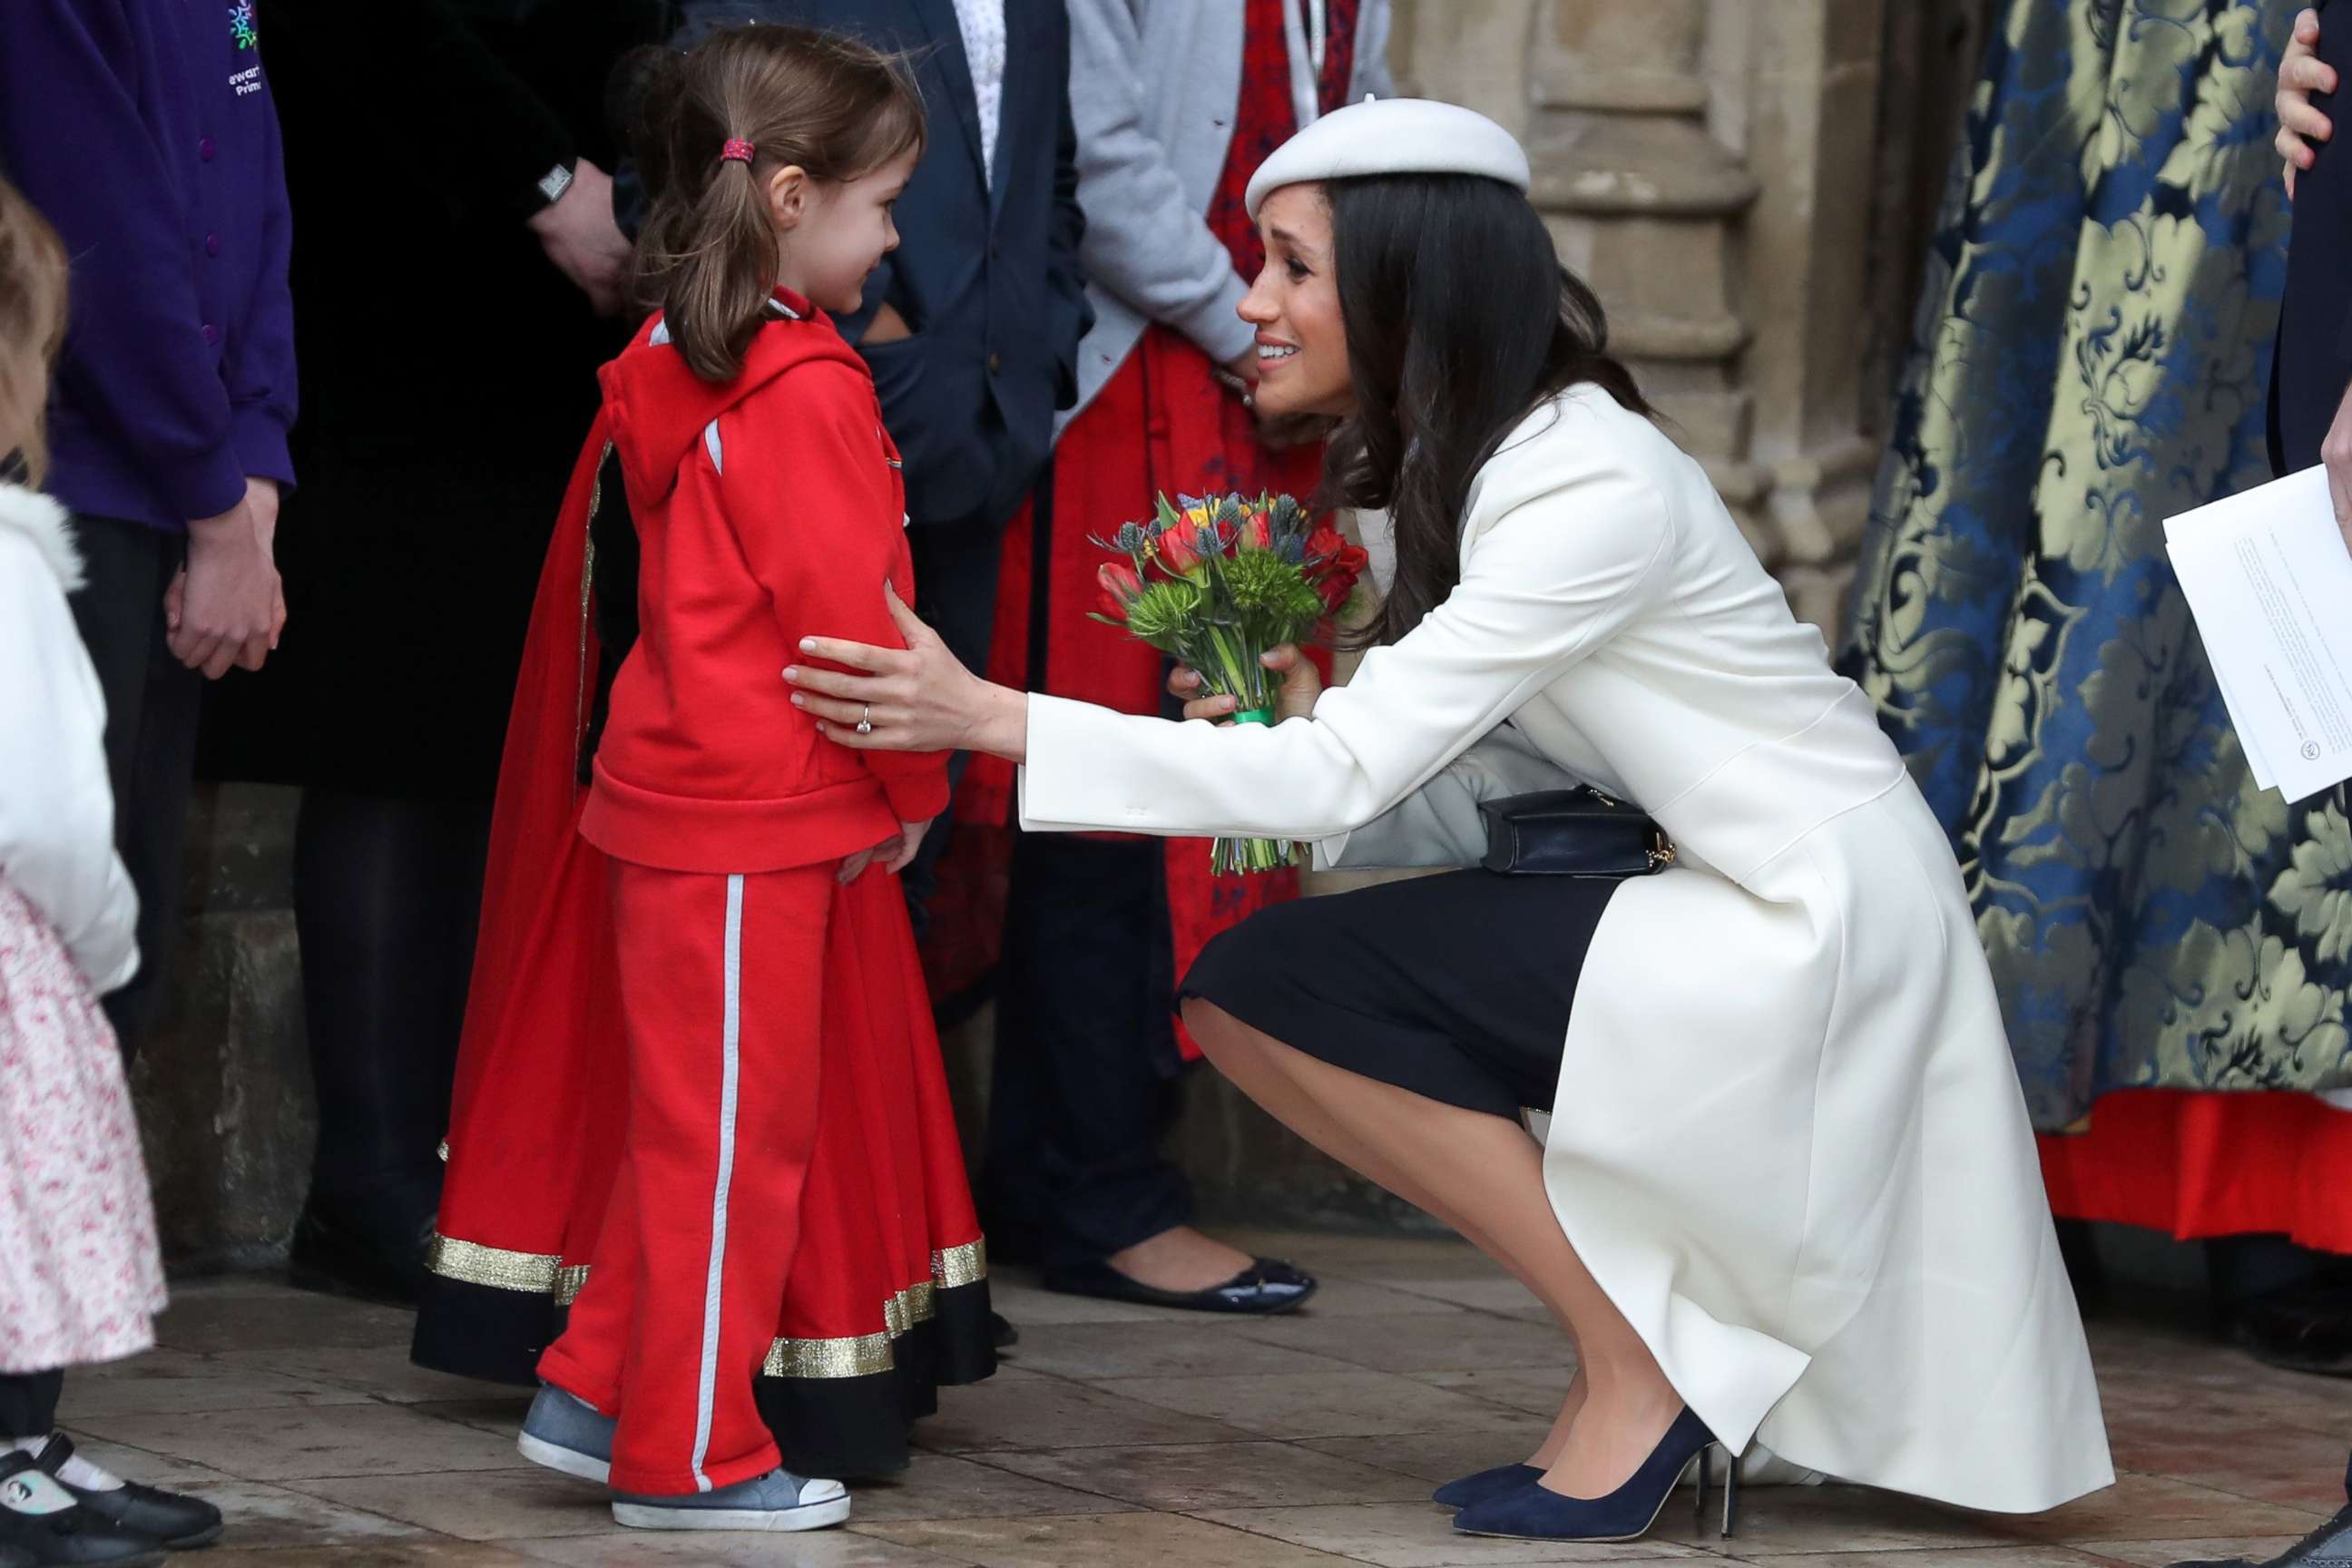 PHOTO: Actress Meghan Markle, fiancee of Britain's Prince Harry, receives a posy of flowers from a young girl after attending a Commonwealth Day Service at Westminster Abbey in central London, March 12, 2018.